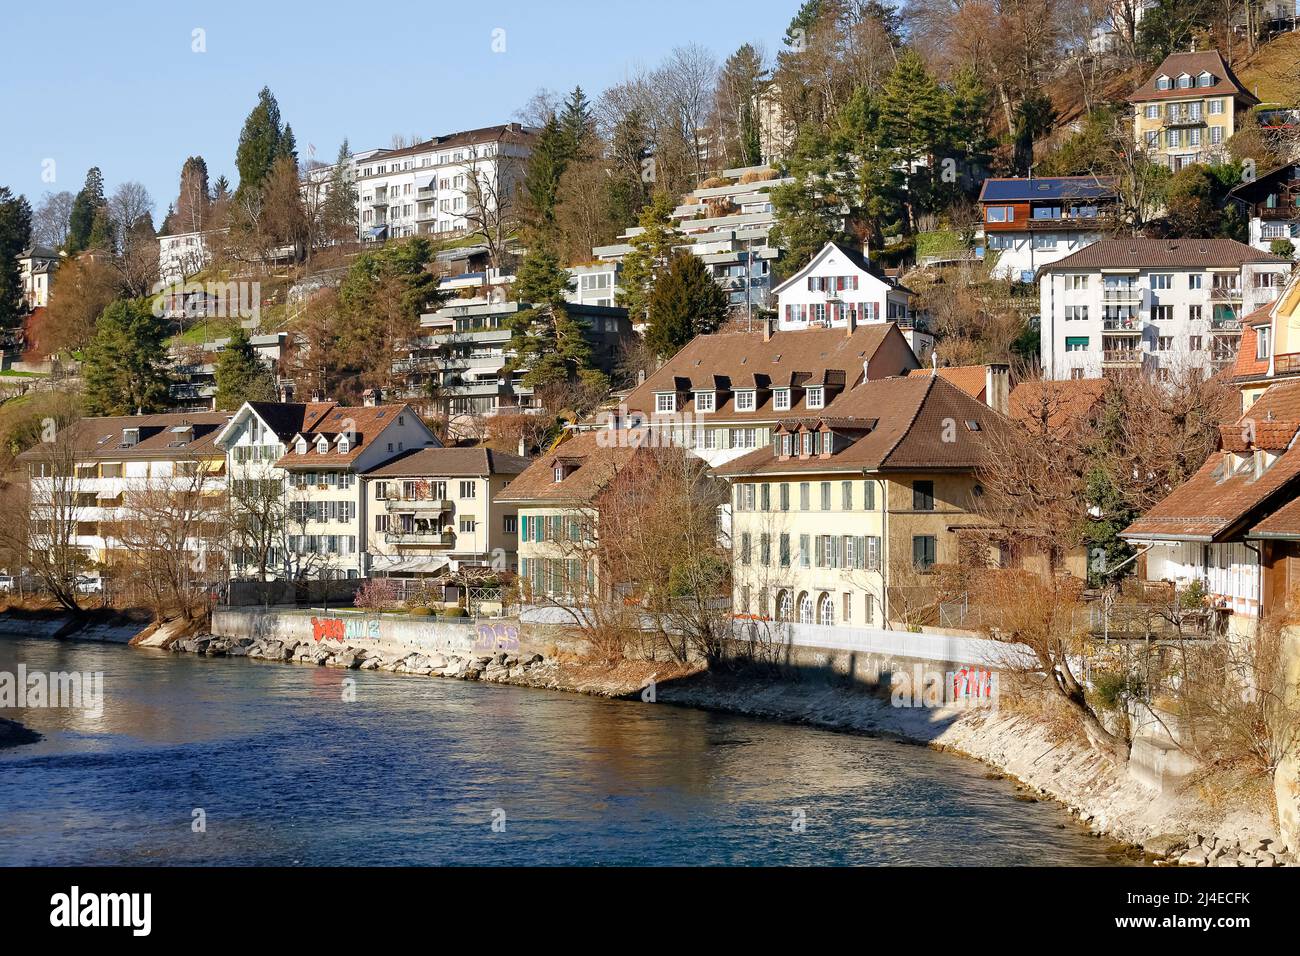 Bern, Switzerland - December 26, 2015: The houses in the city on the banks of the Aare river are visible slightly in the distance is one of the reside Stock Photo